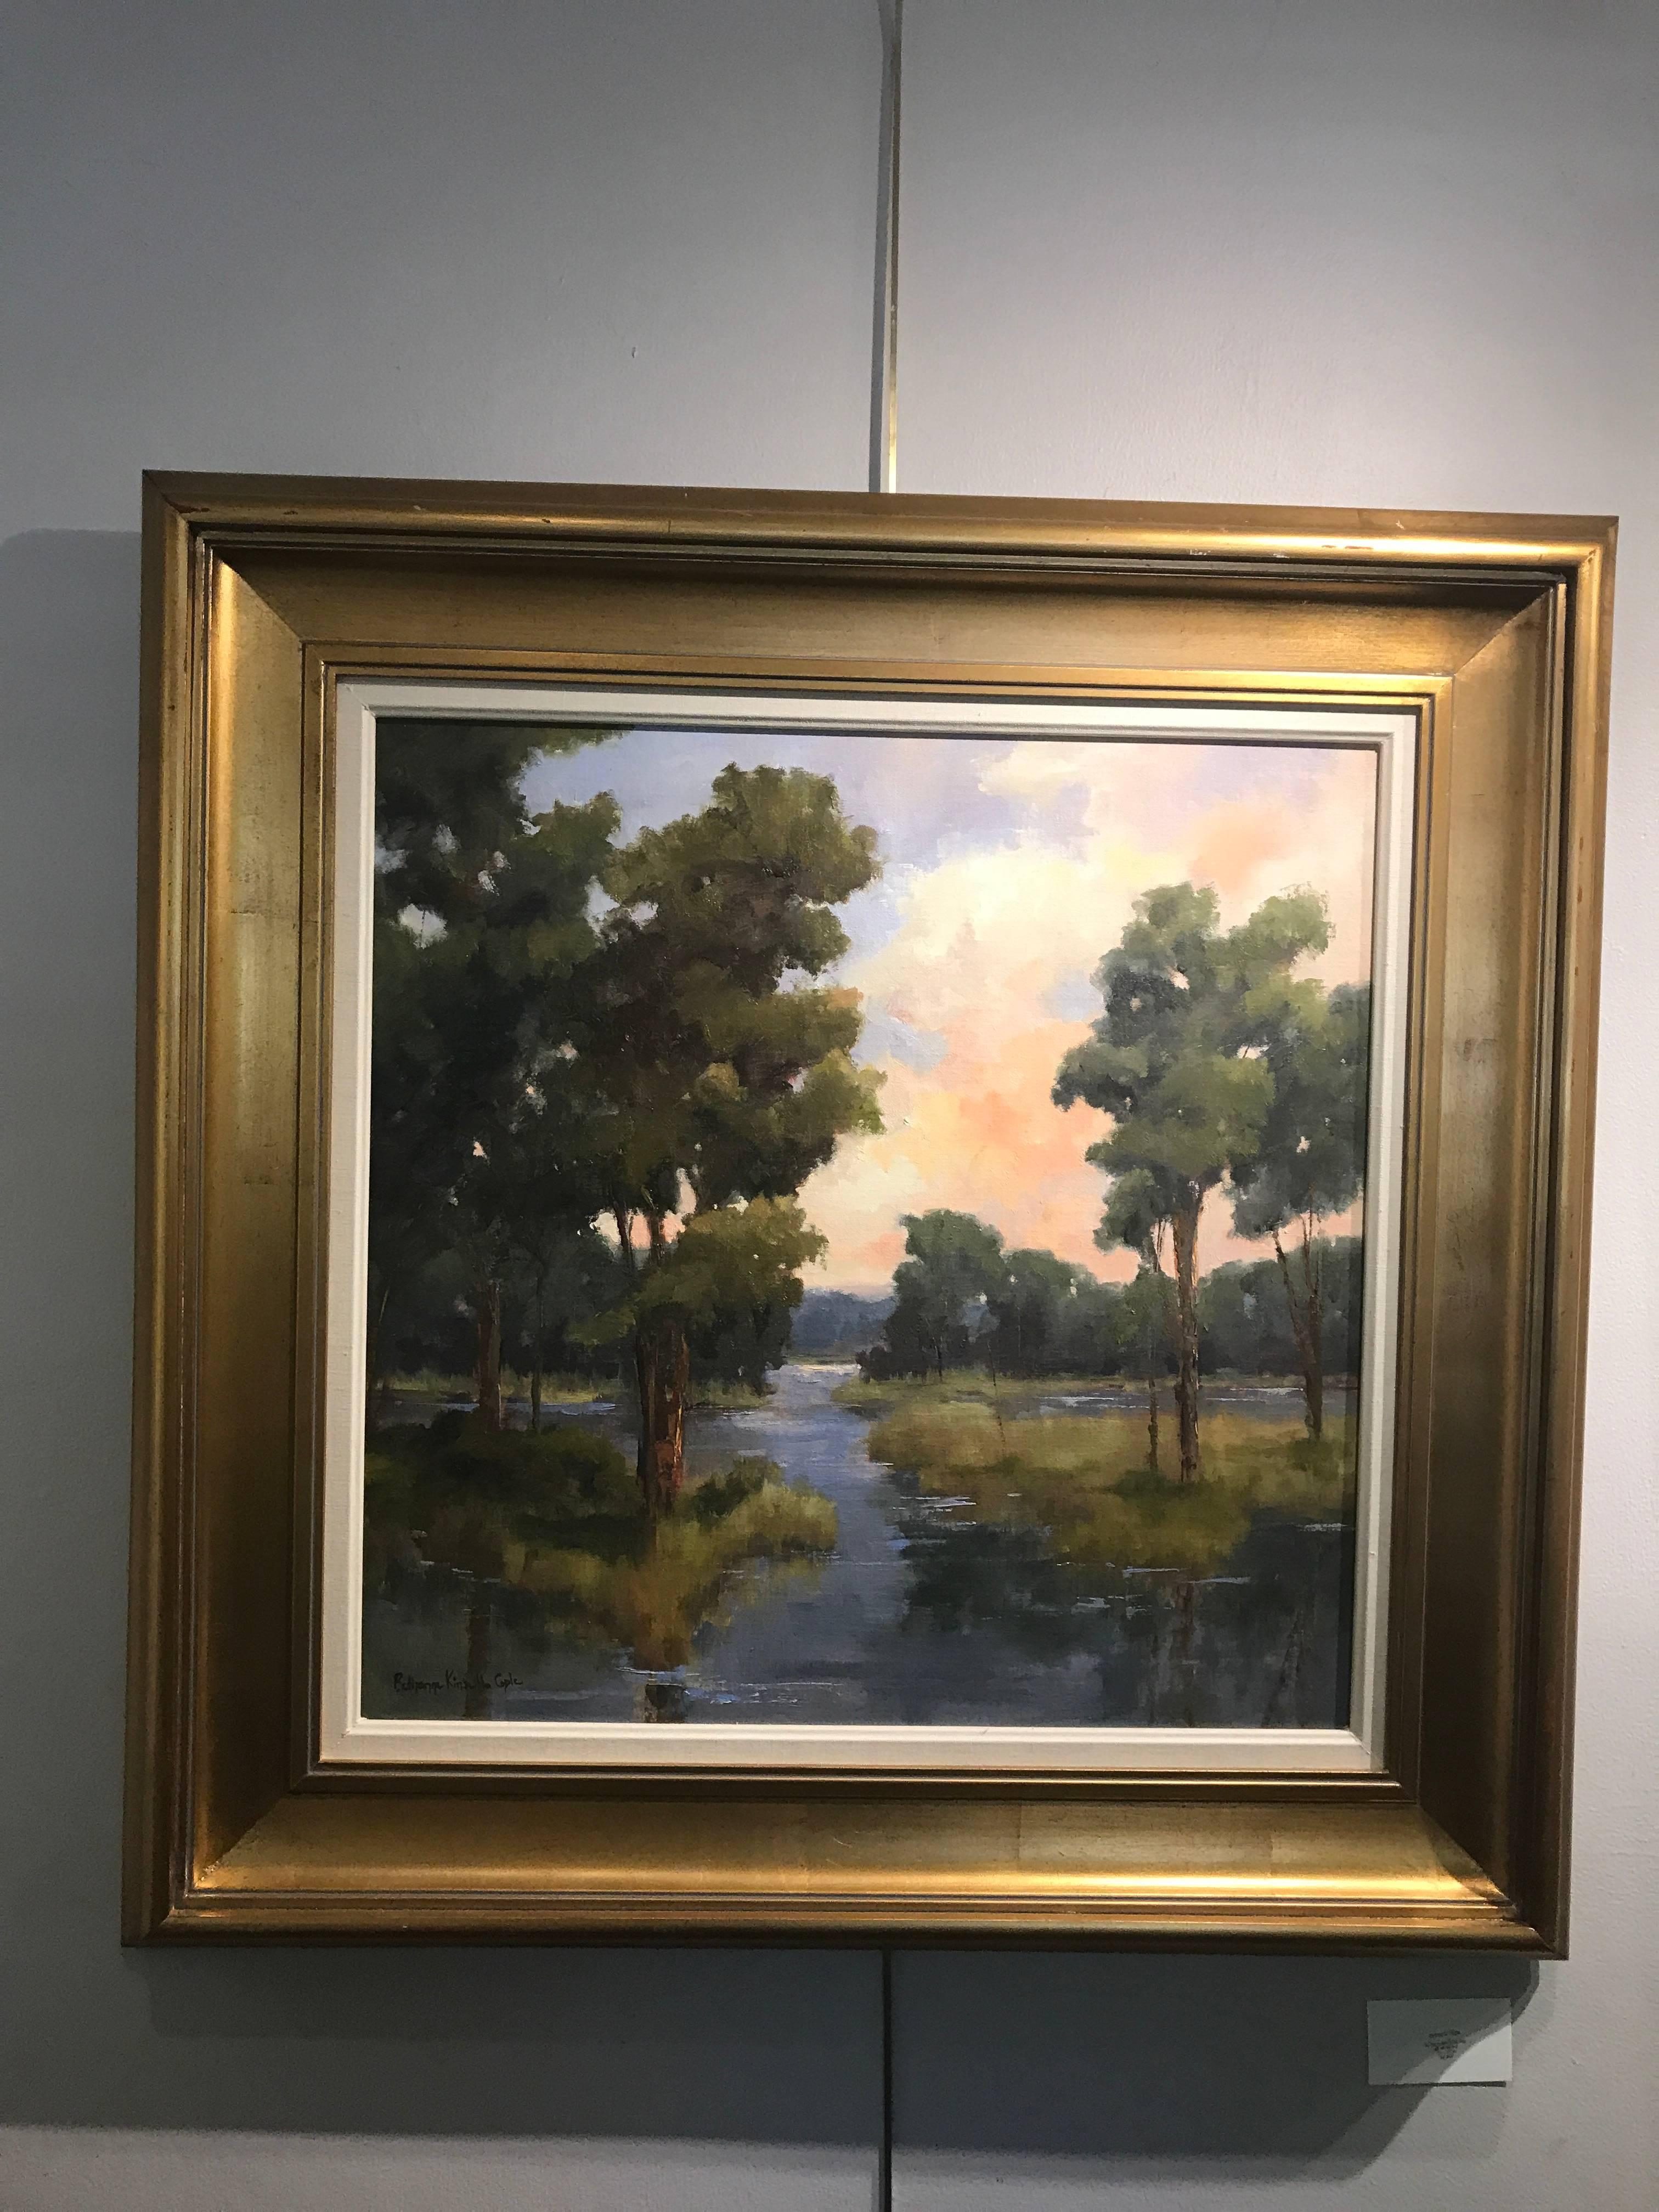 This medium size landscape painting from Virginia plein air artist Bethanne Cople is titled A Tidewater Evening. Made in 2010, it is the perfect southern landscape showing sunset on a beautiful lake. The pretty pinks in the sky mark the end of a